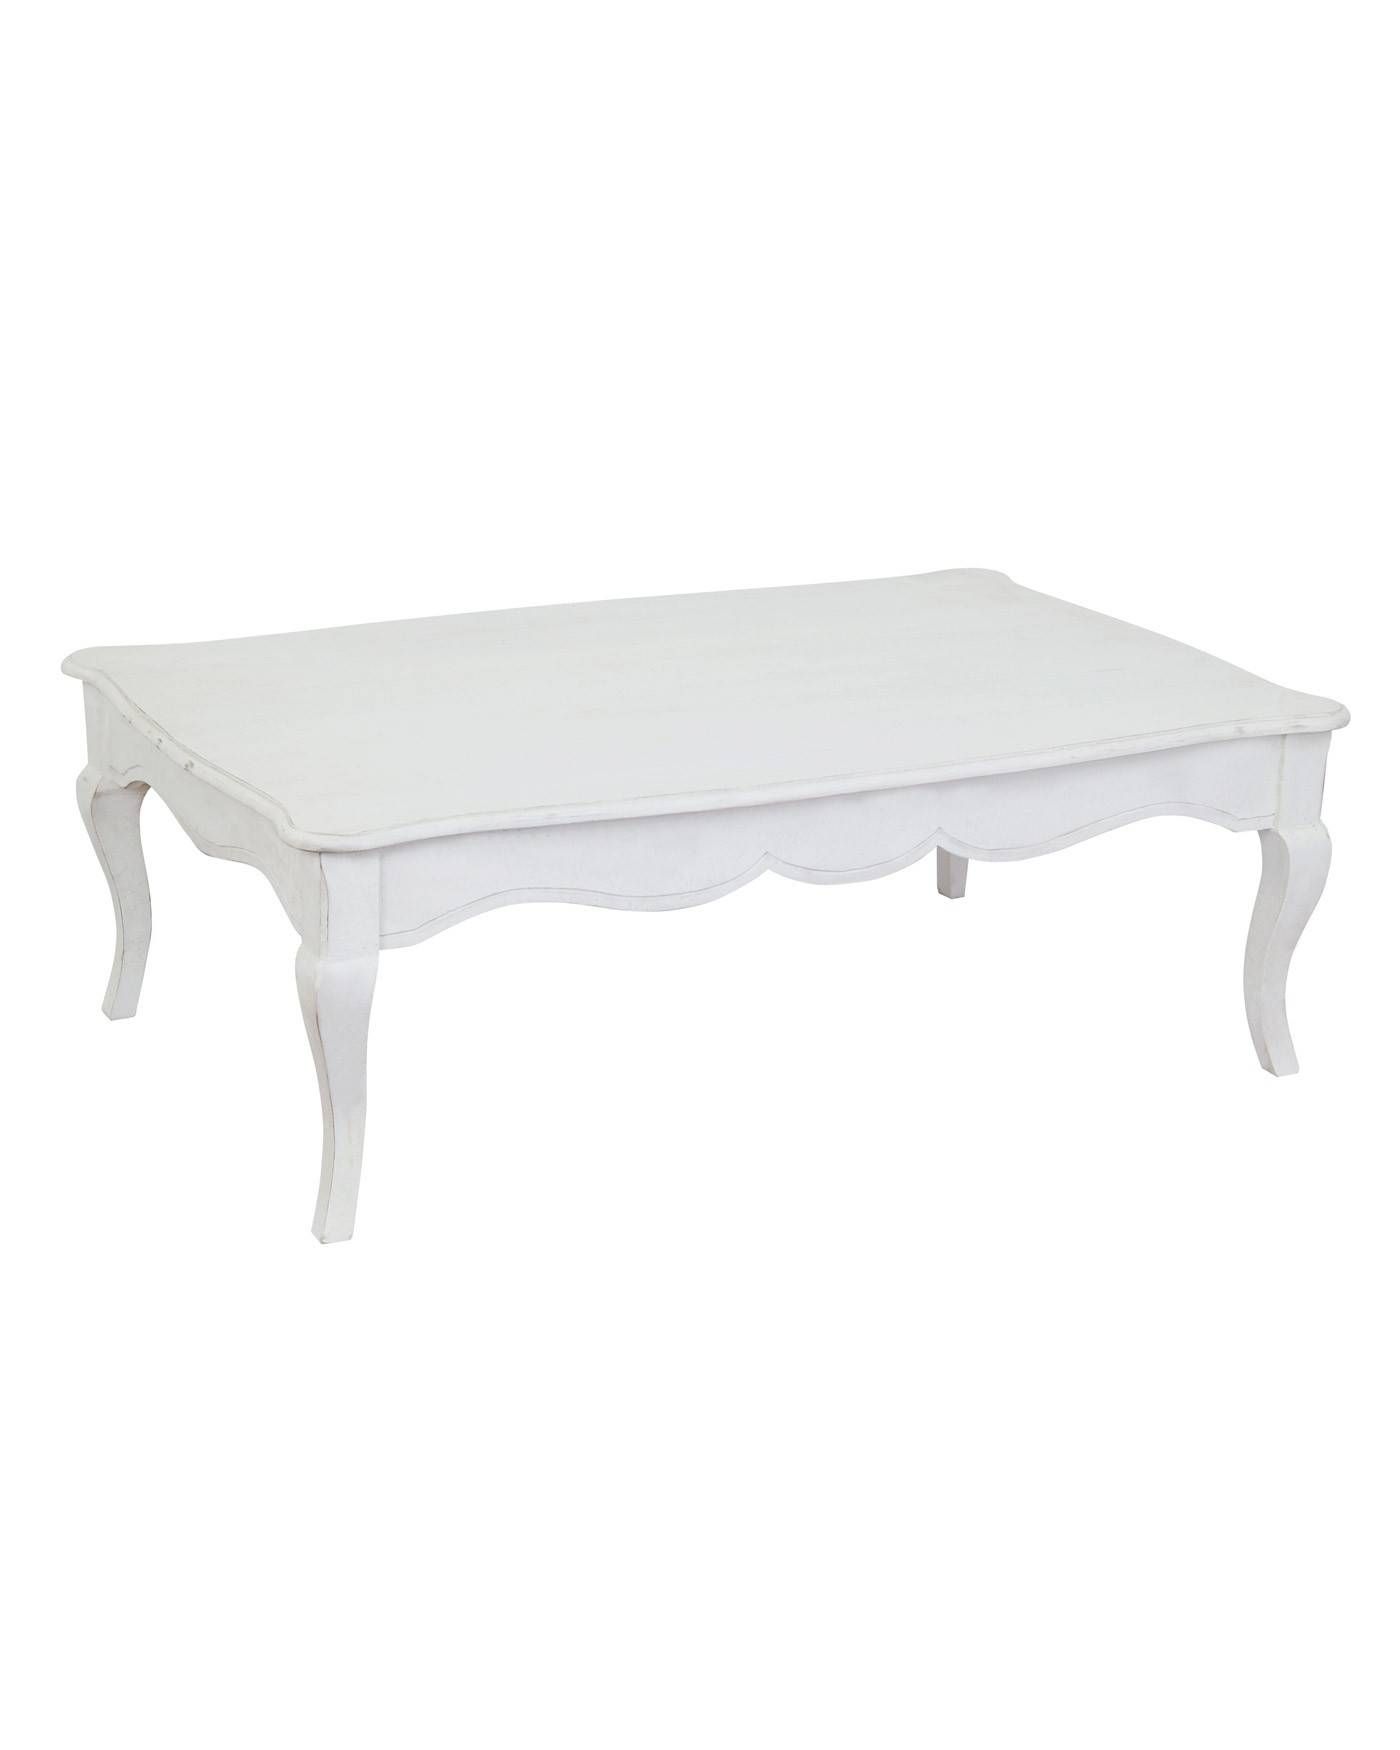 New Orleans Distressed White Vintage Coffee Table With Cabriole Inside White Retro Coffee Tables (View 2 of 30)